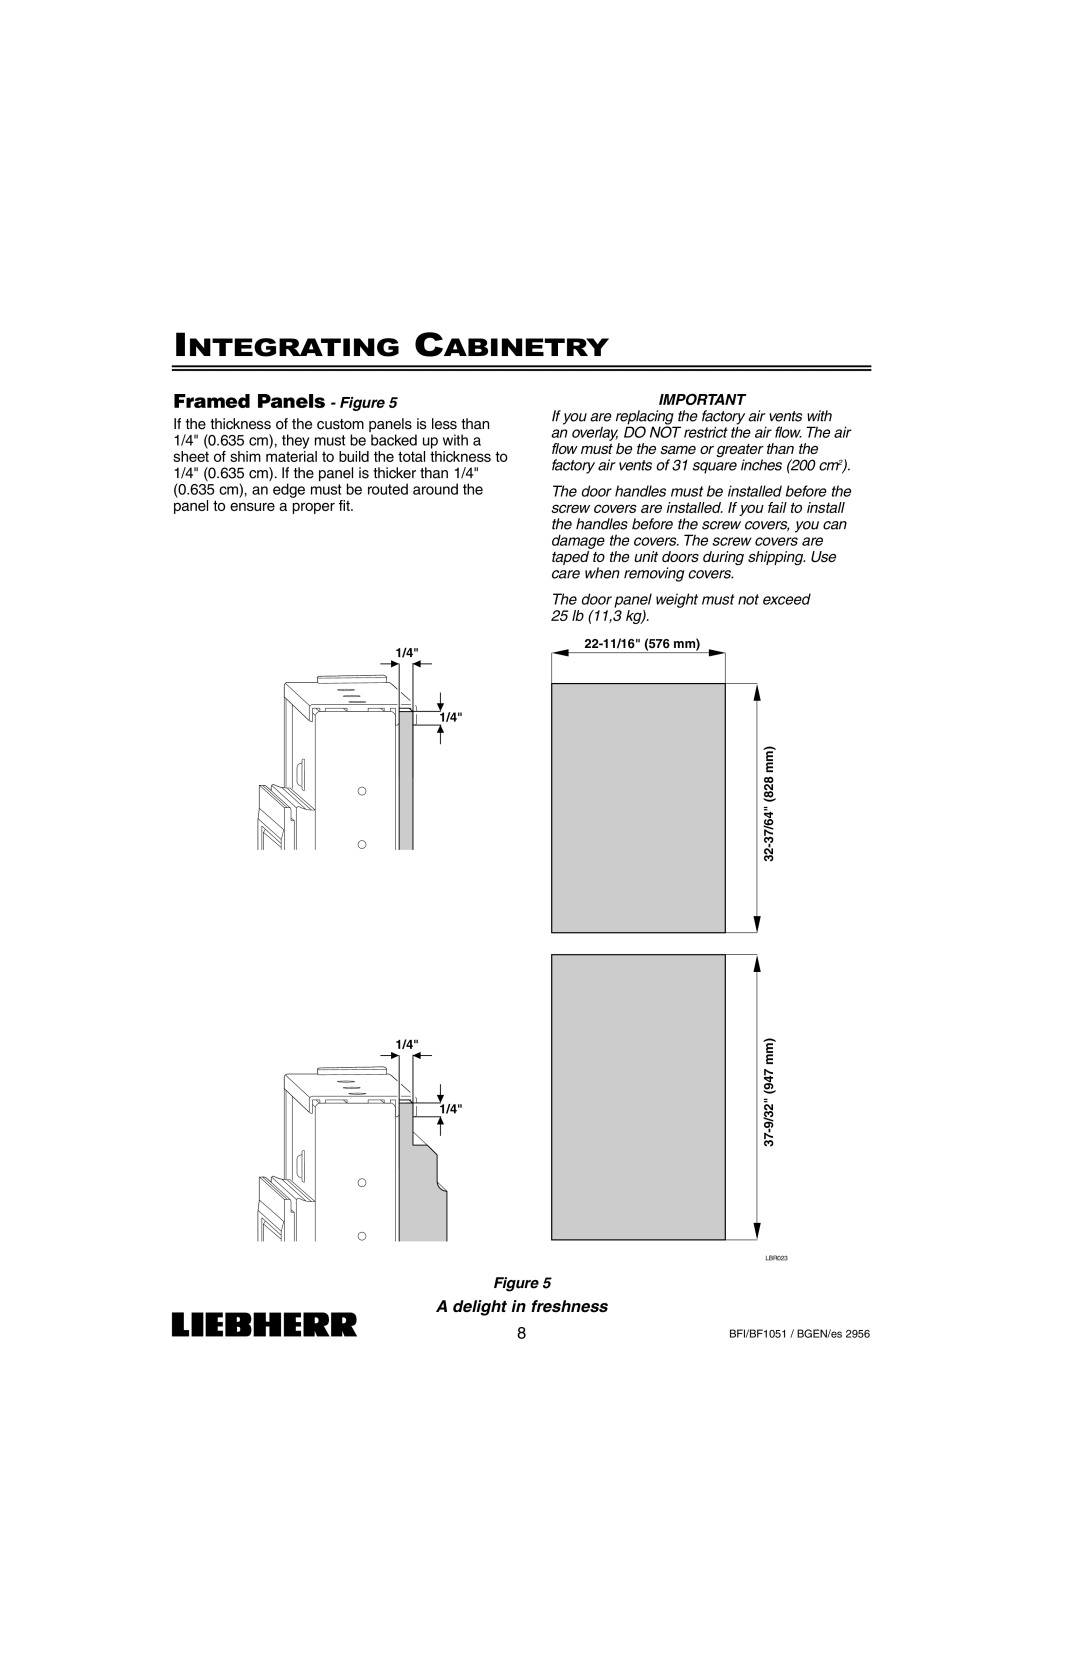 Liebherr BFI1051, BF1051 installation instructions Integrating Cabinetry, Framed Panels - Figure, A delight in freshness 